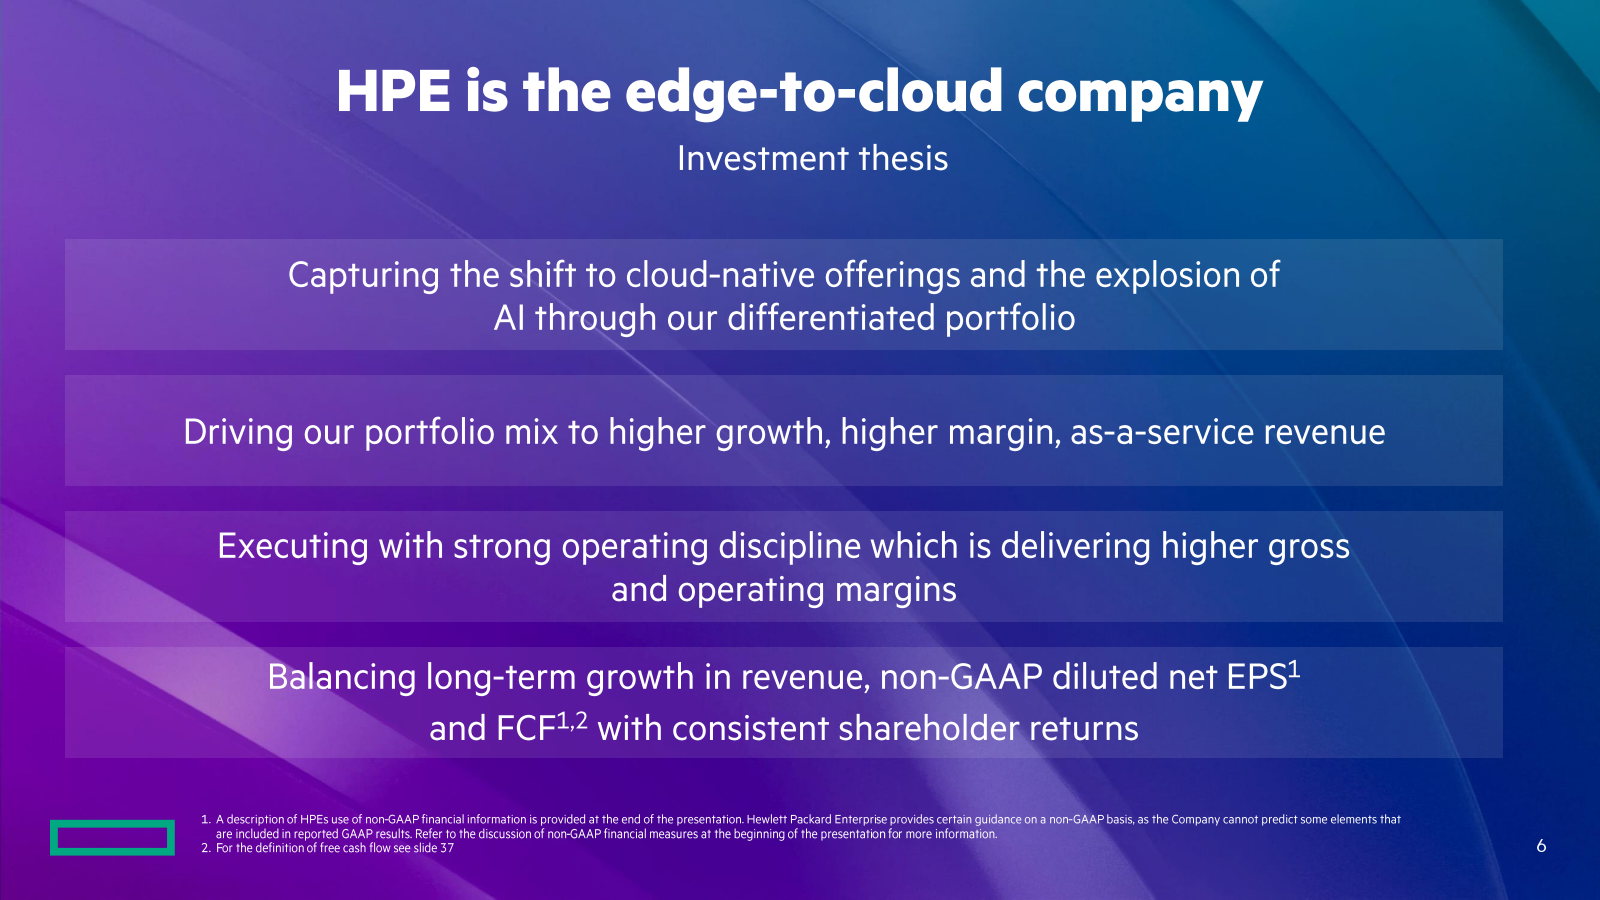 HPE is the edge - to